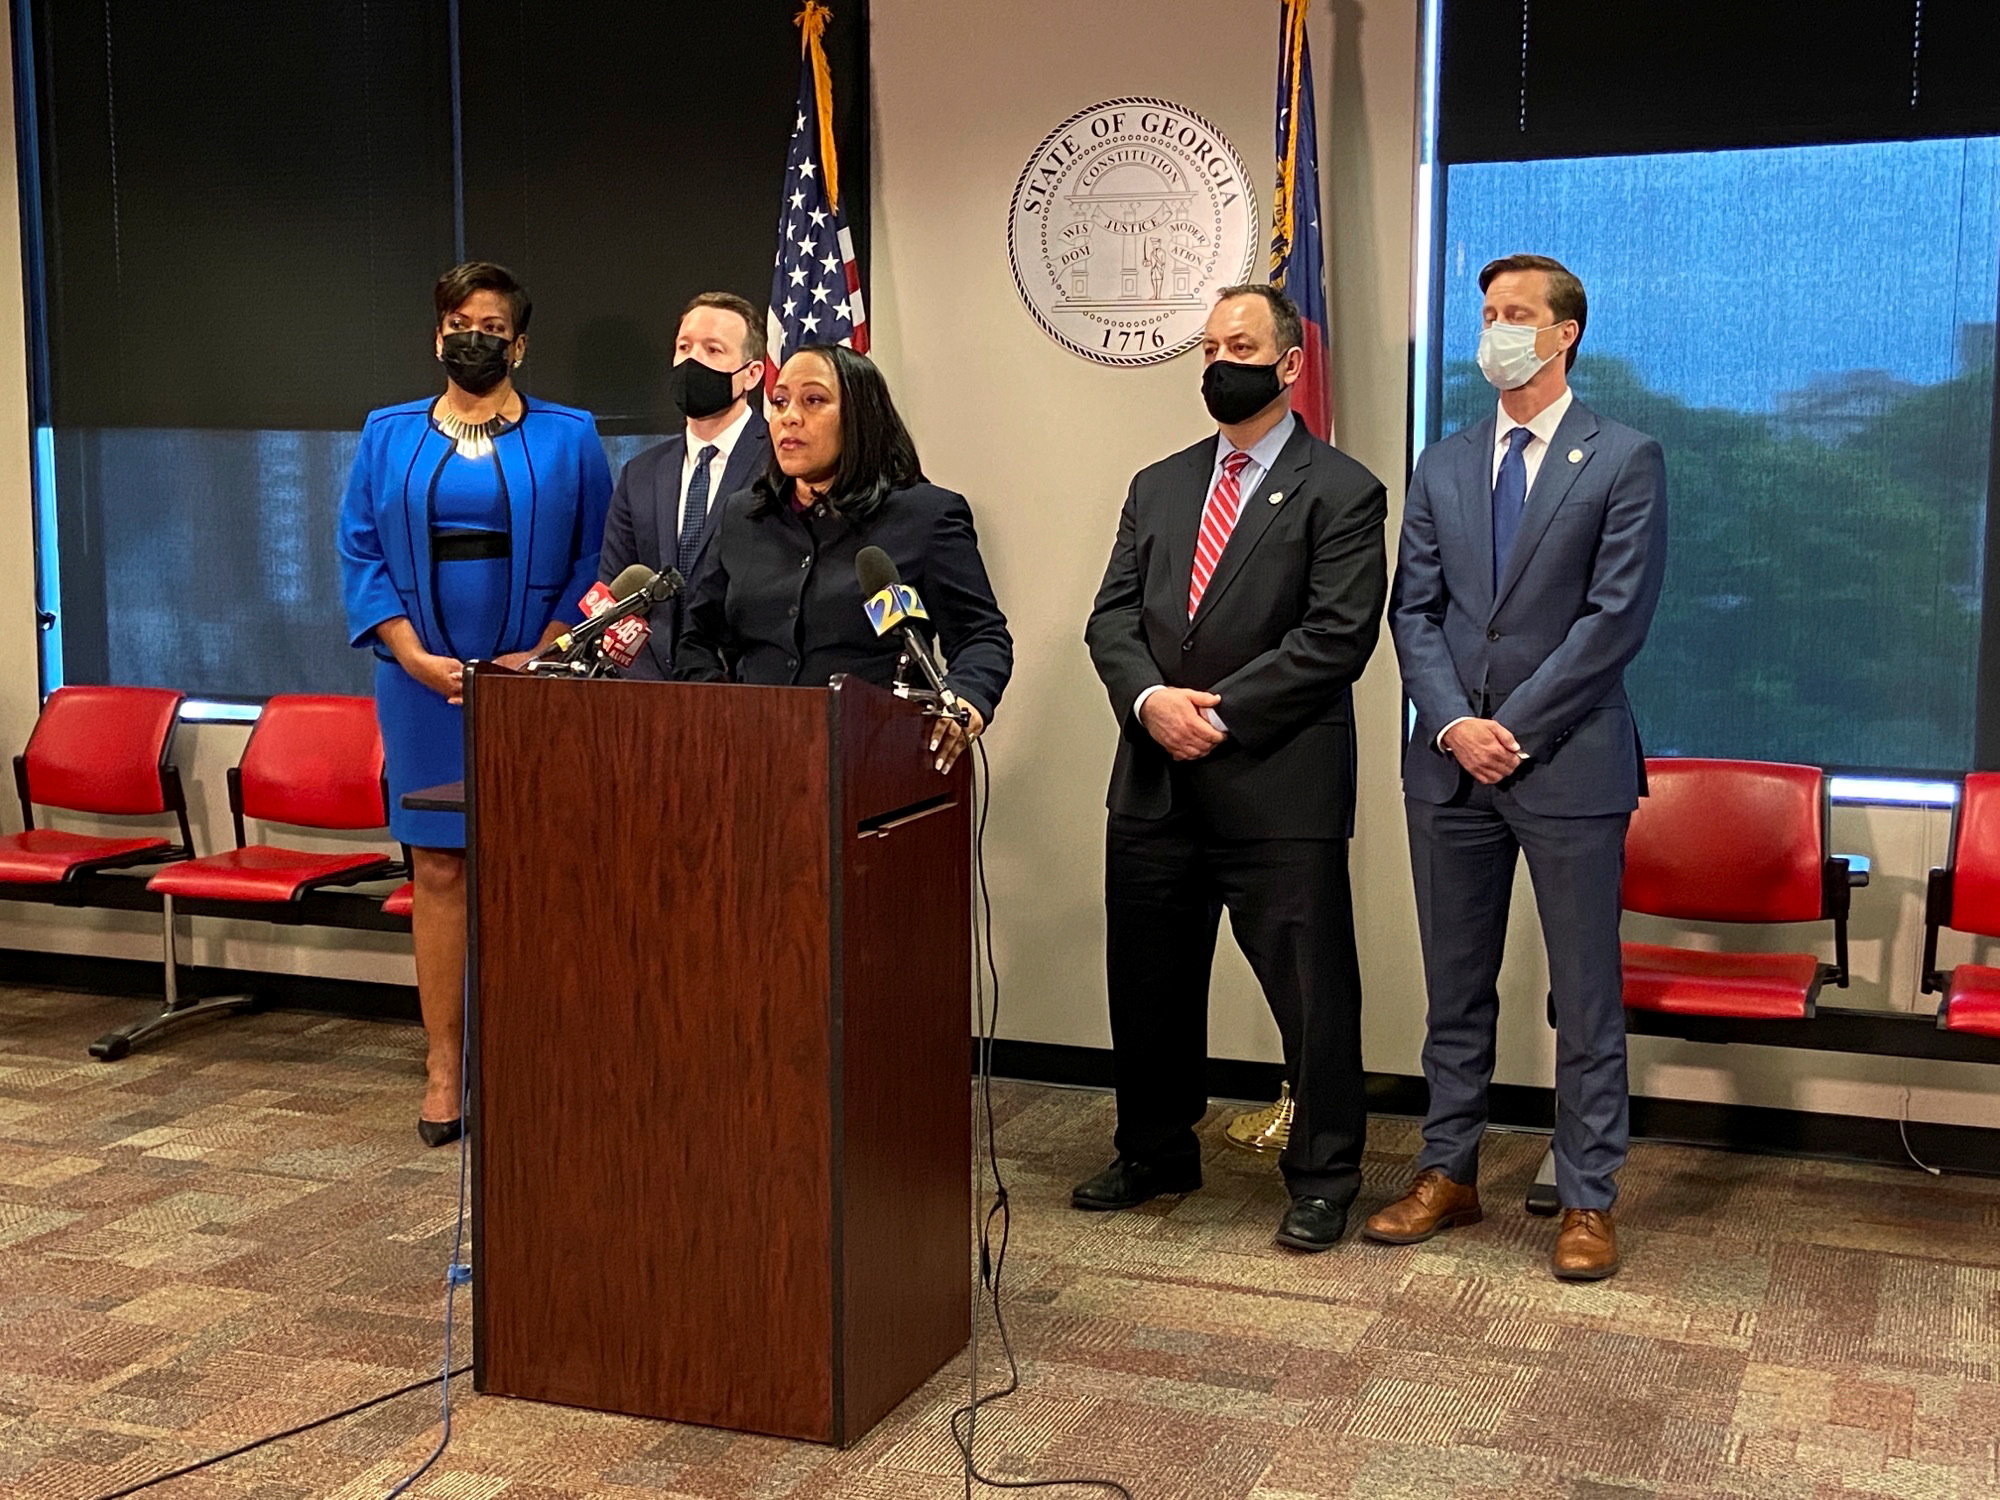 Fulton County District Attorney Fani Willis announces she will seek the death penalty in the Atlanta area spa shootings at a news conference in Atlanta